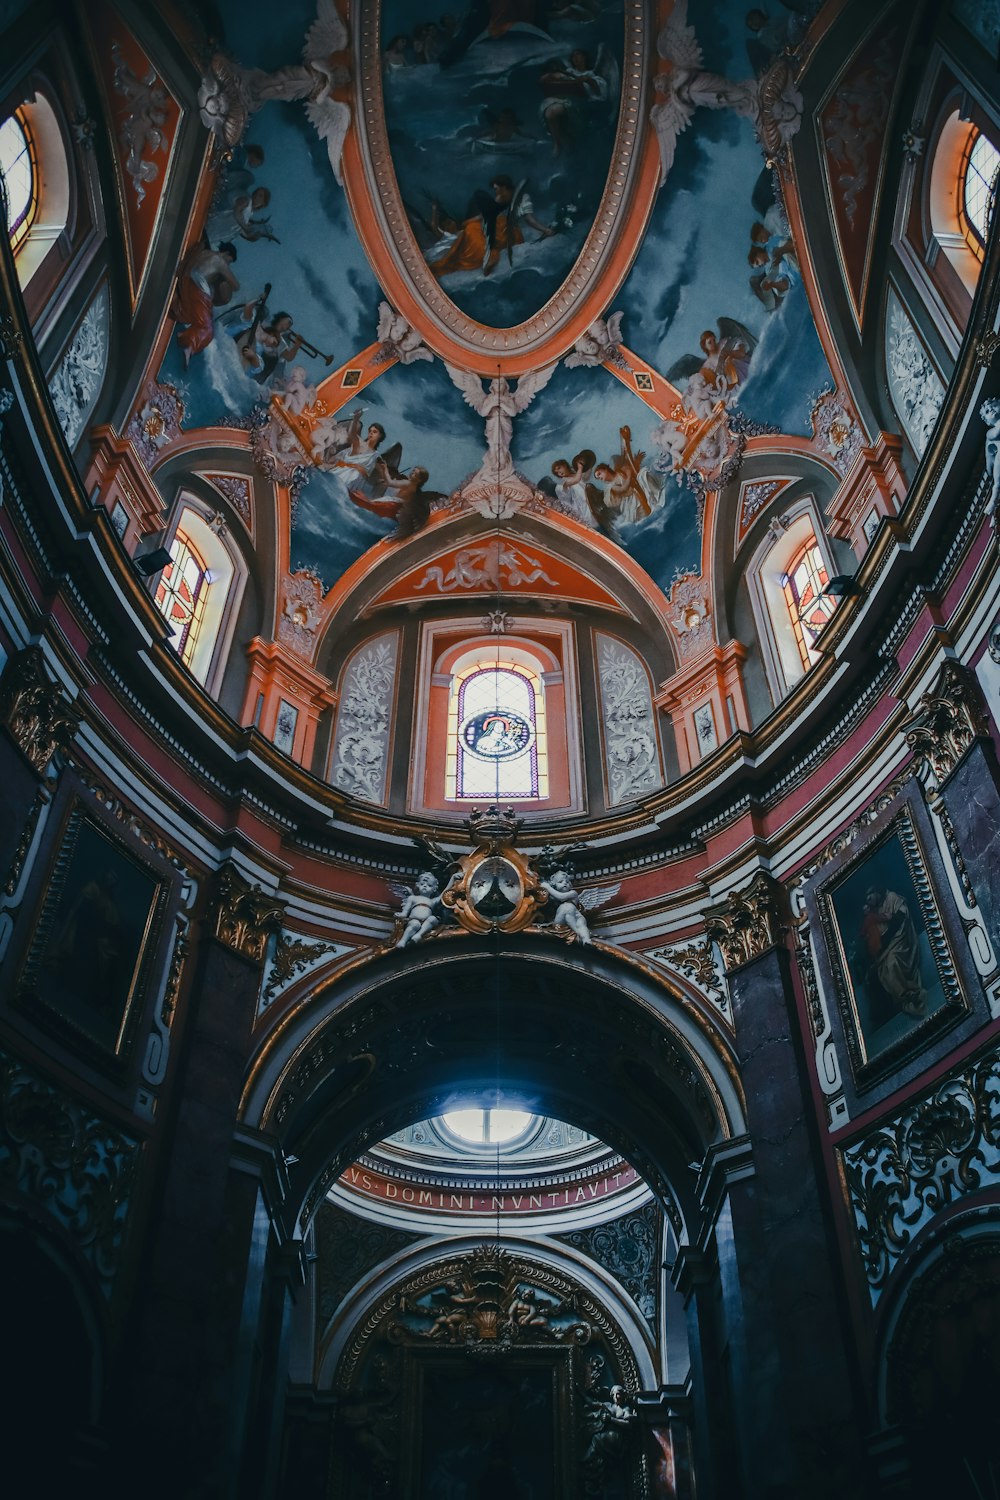 the ceiling of a church with a stained glass window